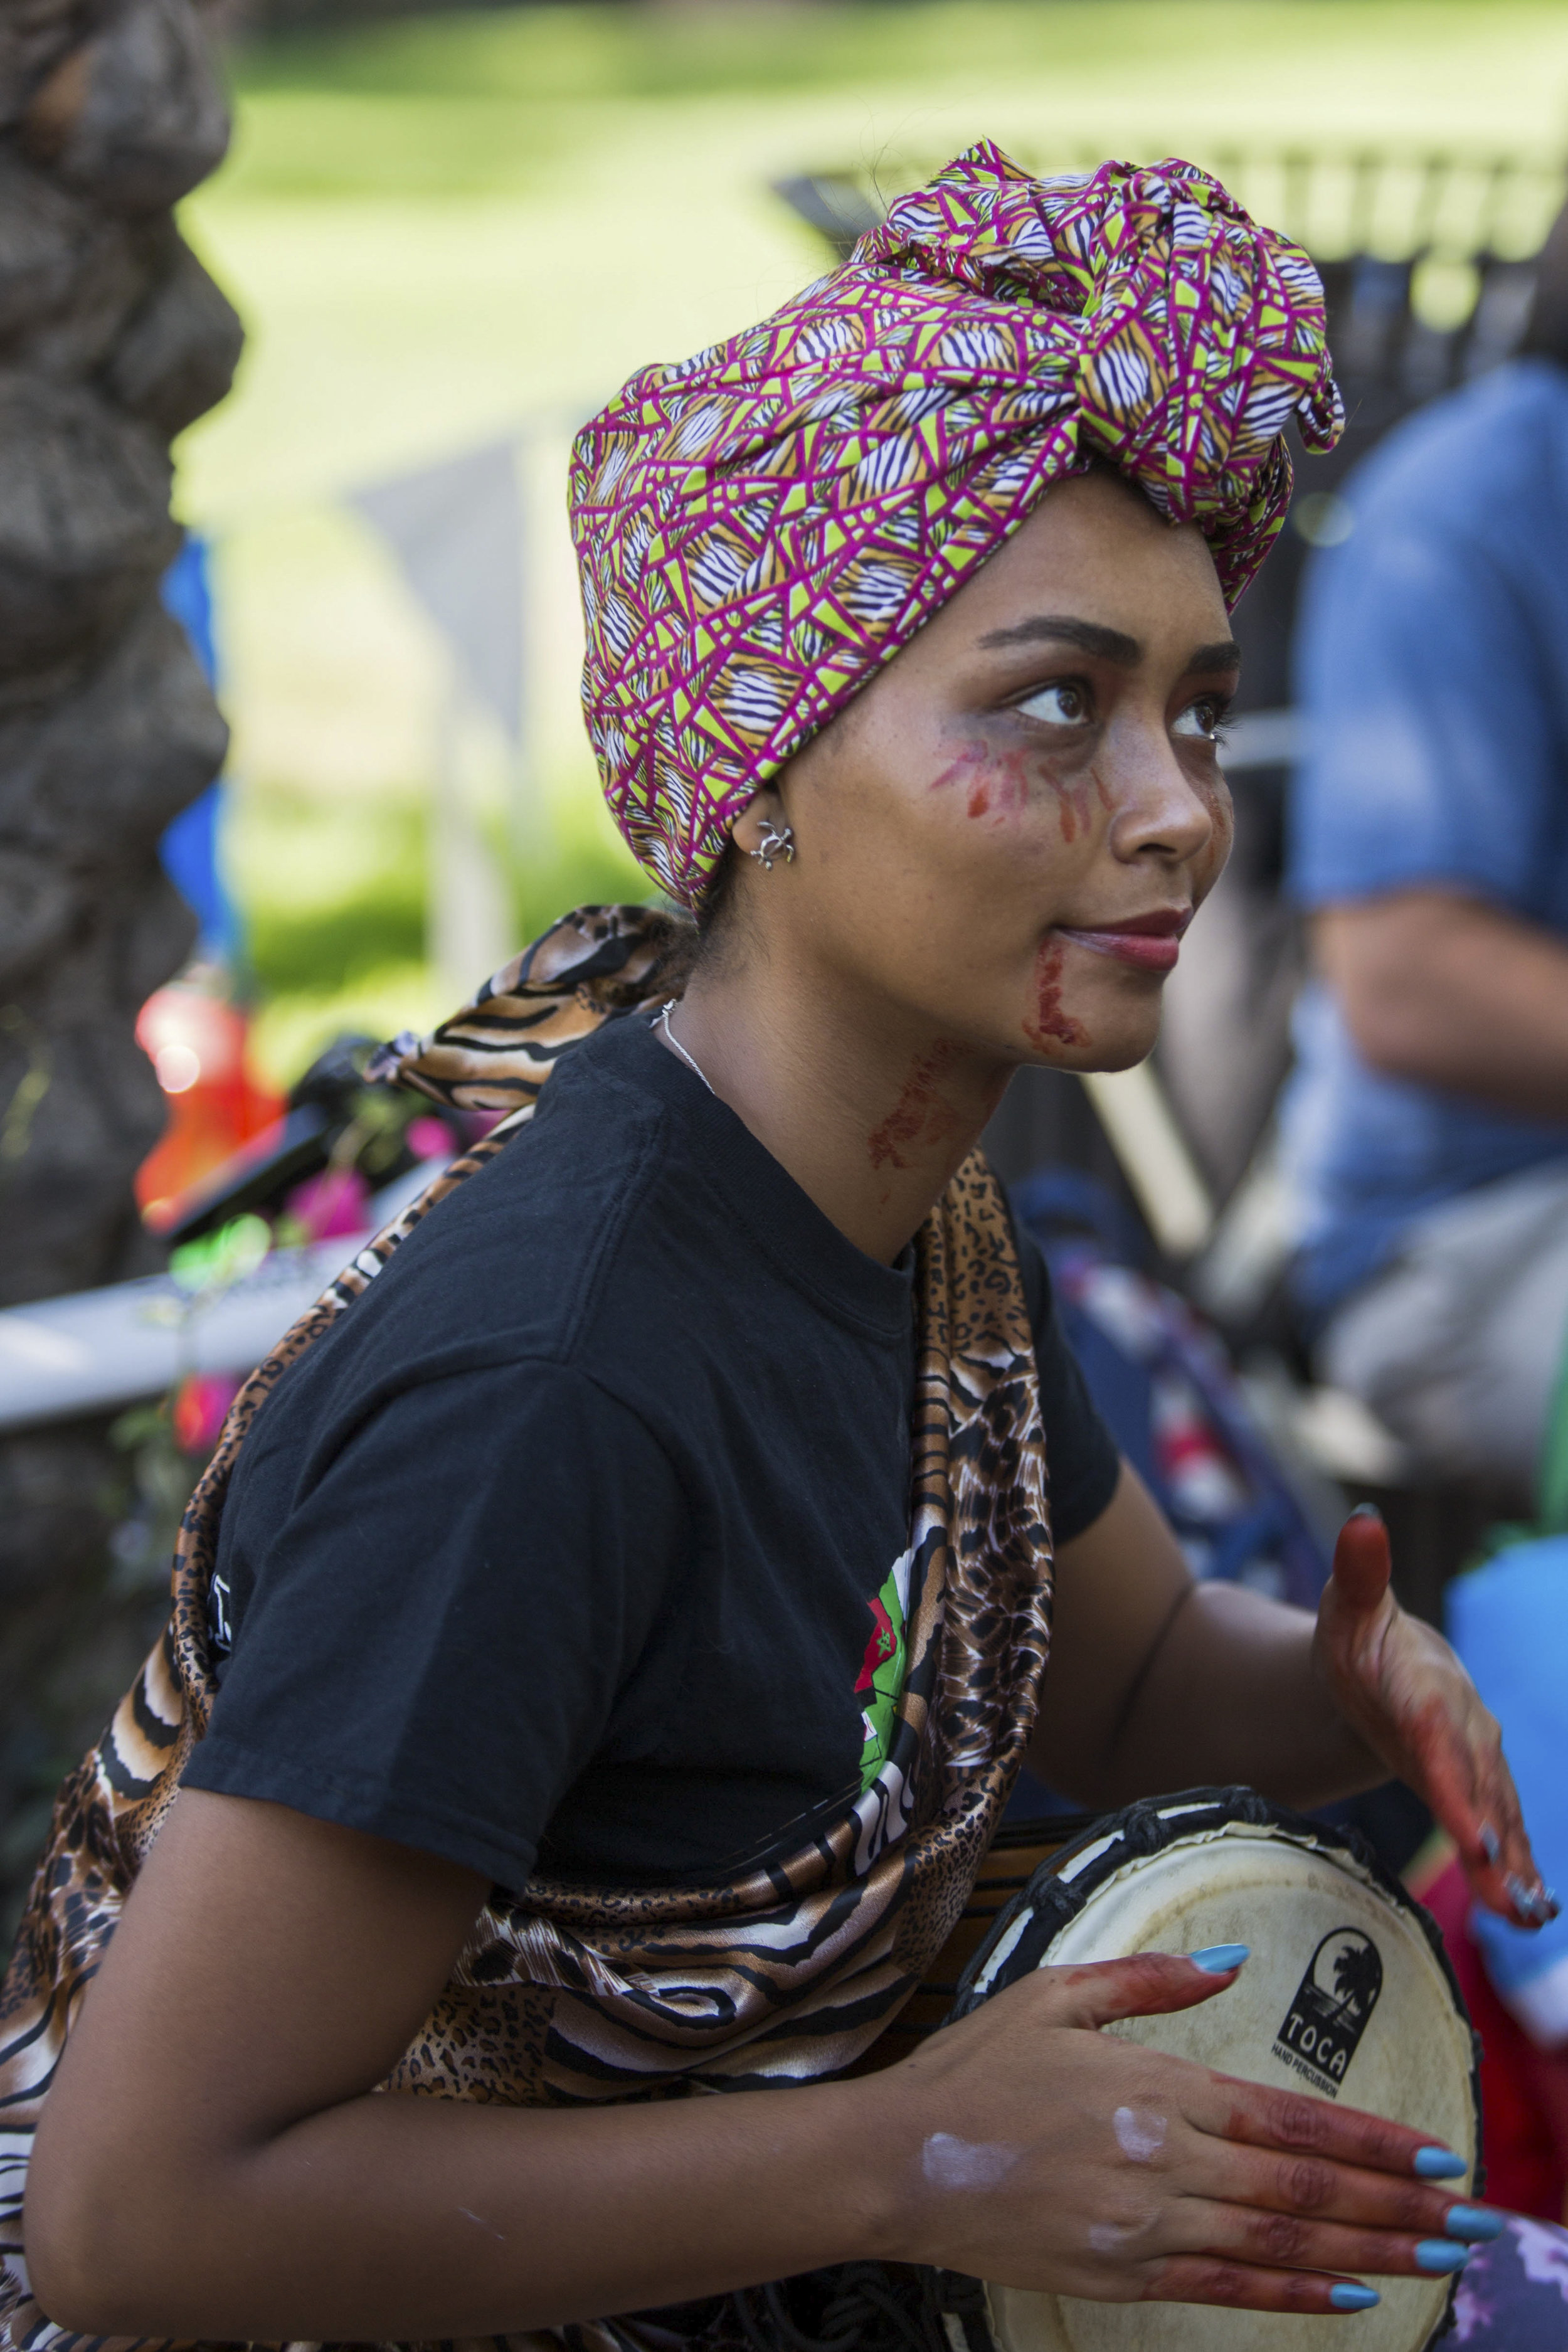  Hilsenbek-steffie Yema, member of Pan-African Student Union plays Toca drum at their club's booth during Club Row event at Santa Monica College Main Campus on Thursday, October 26th, 2017 in Santa Monica, California. (Photo by Yuki Iwamura) 